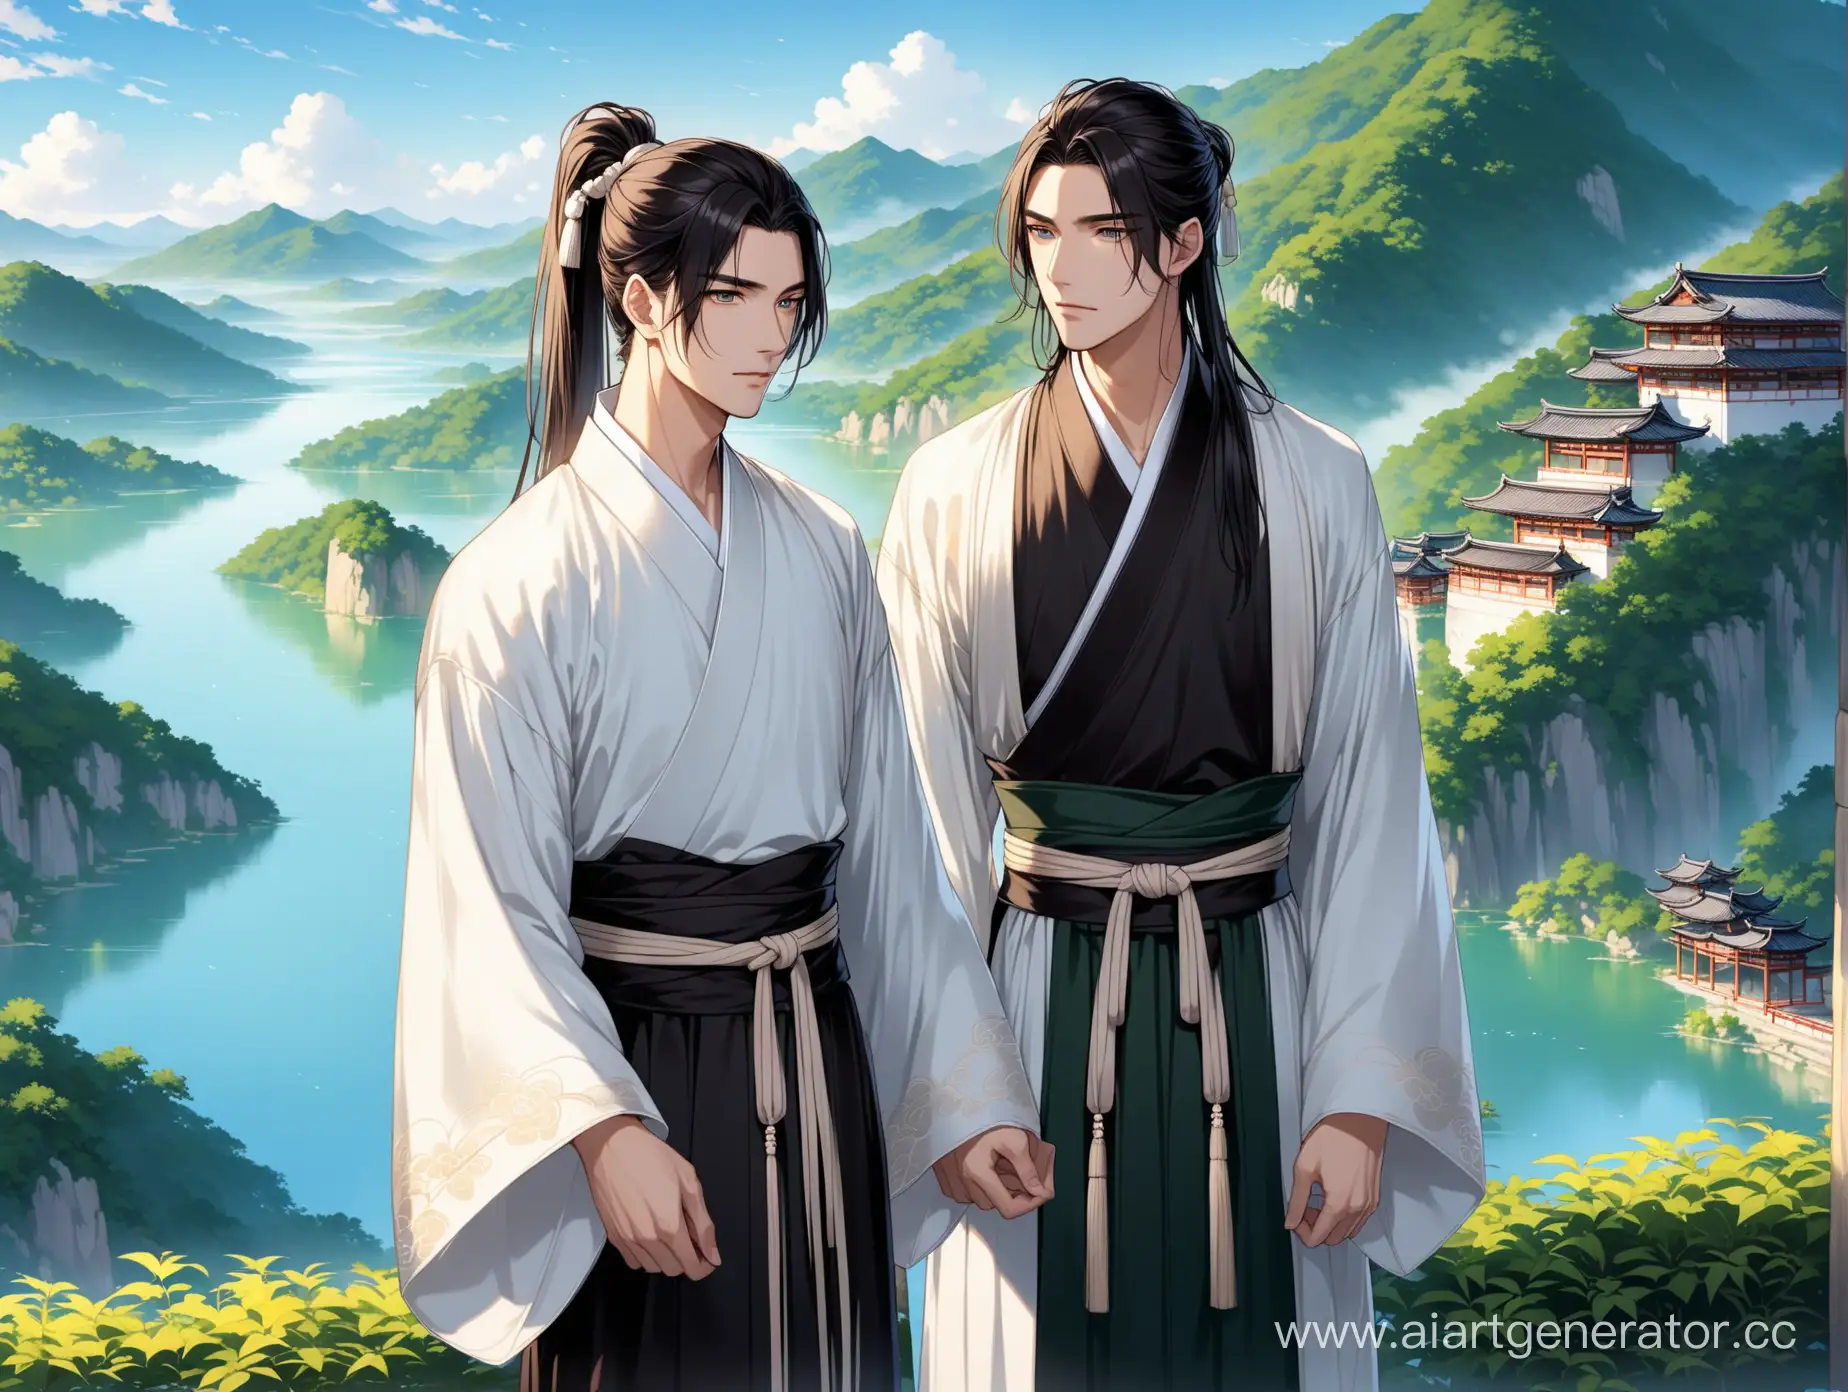 Two graceful men, in white and black hanfu, noble appearance, beautiful eyes, men hair is tied up high in ponytail, young men long dark hair, beautiful landscape